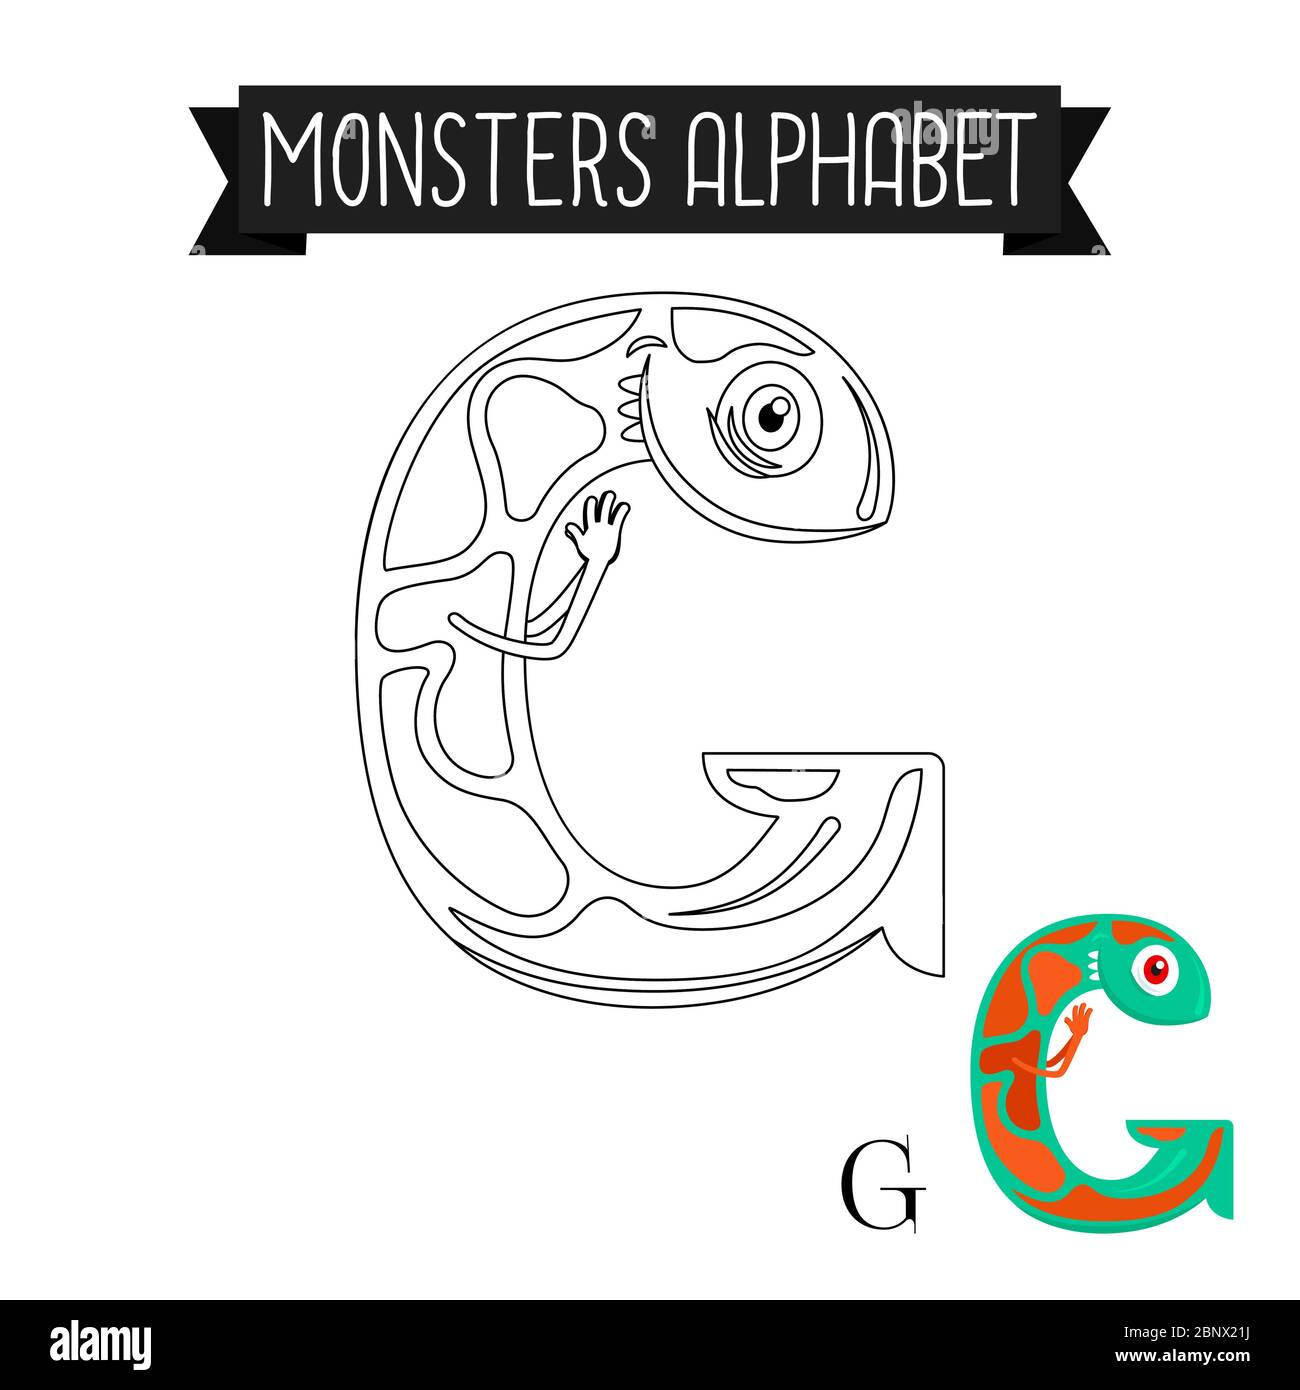 Coloring Page Monsters Alphabet For Kids Letter G Vector Illustration Stock Vector Image Art Alamy